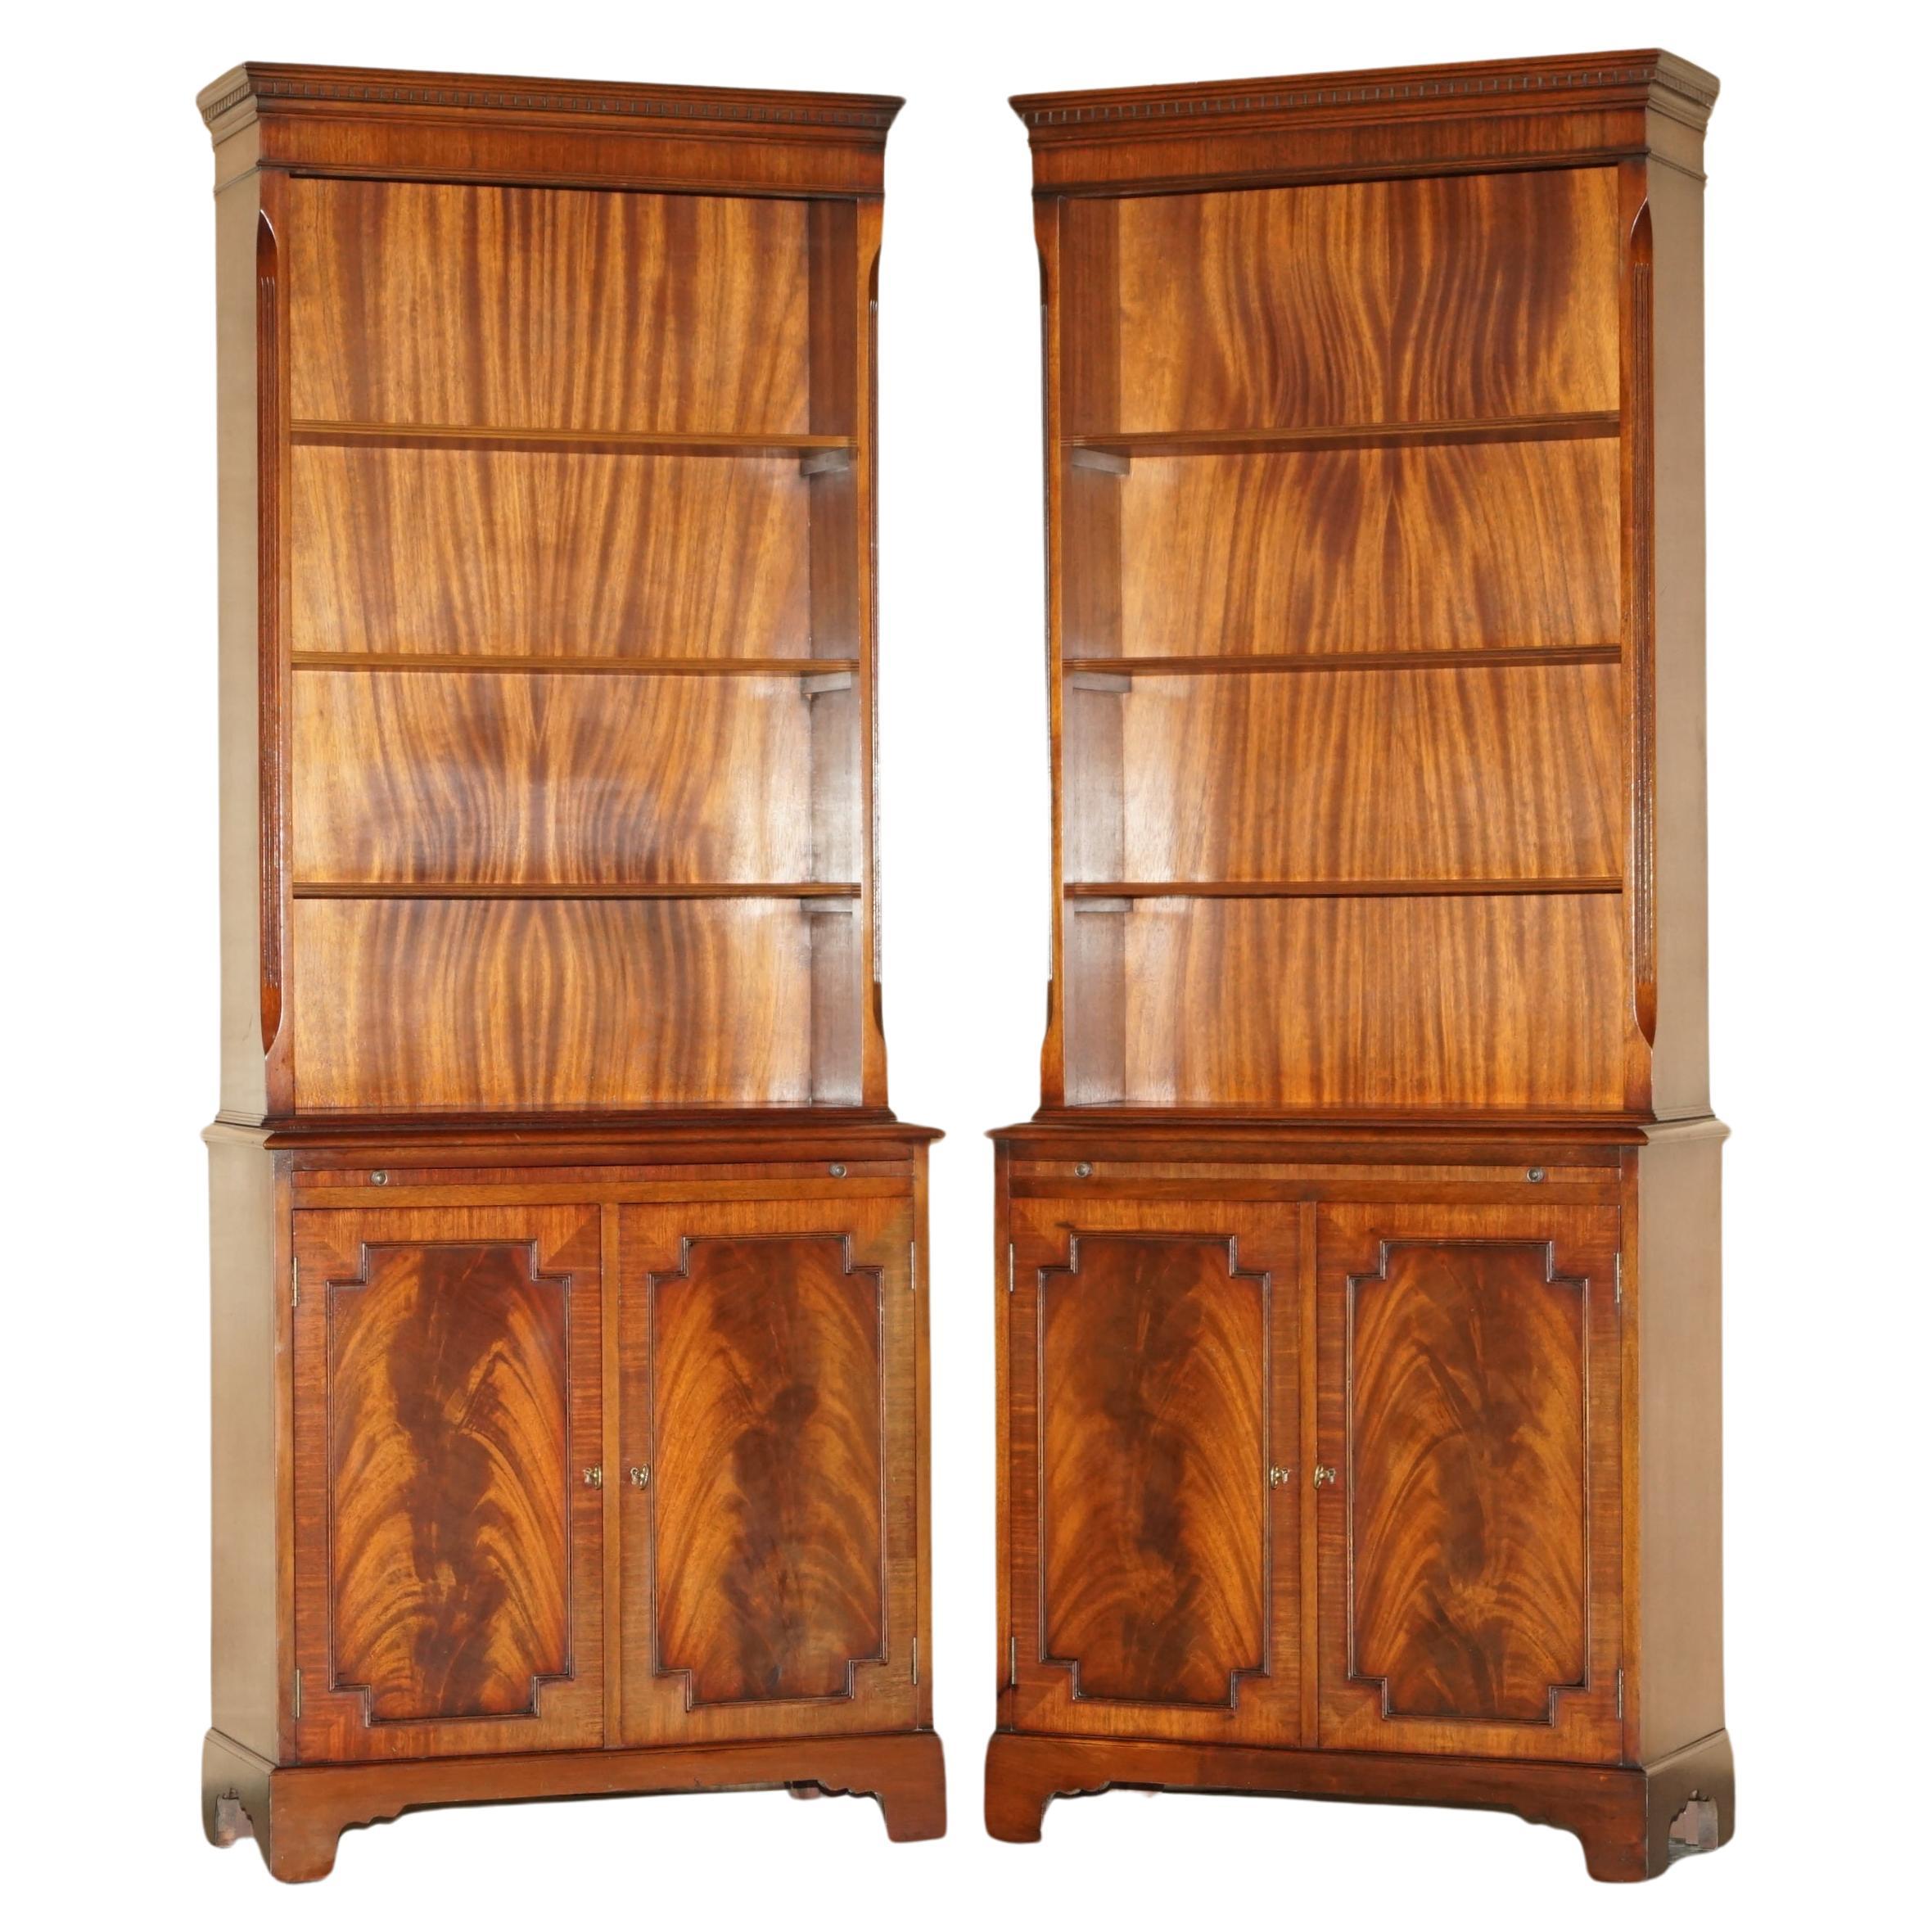 EXQUISITE PAIR OF FLAMED HARDWOOD LIBRARY BOOKCASES SLIP DRiNKS SERVING SHELVES For Sale